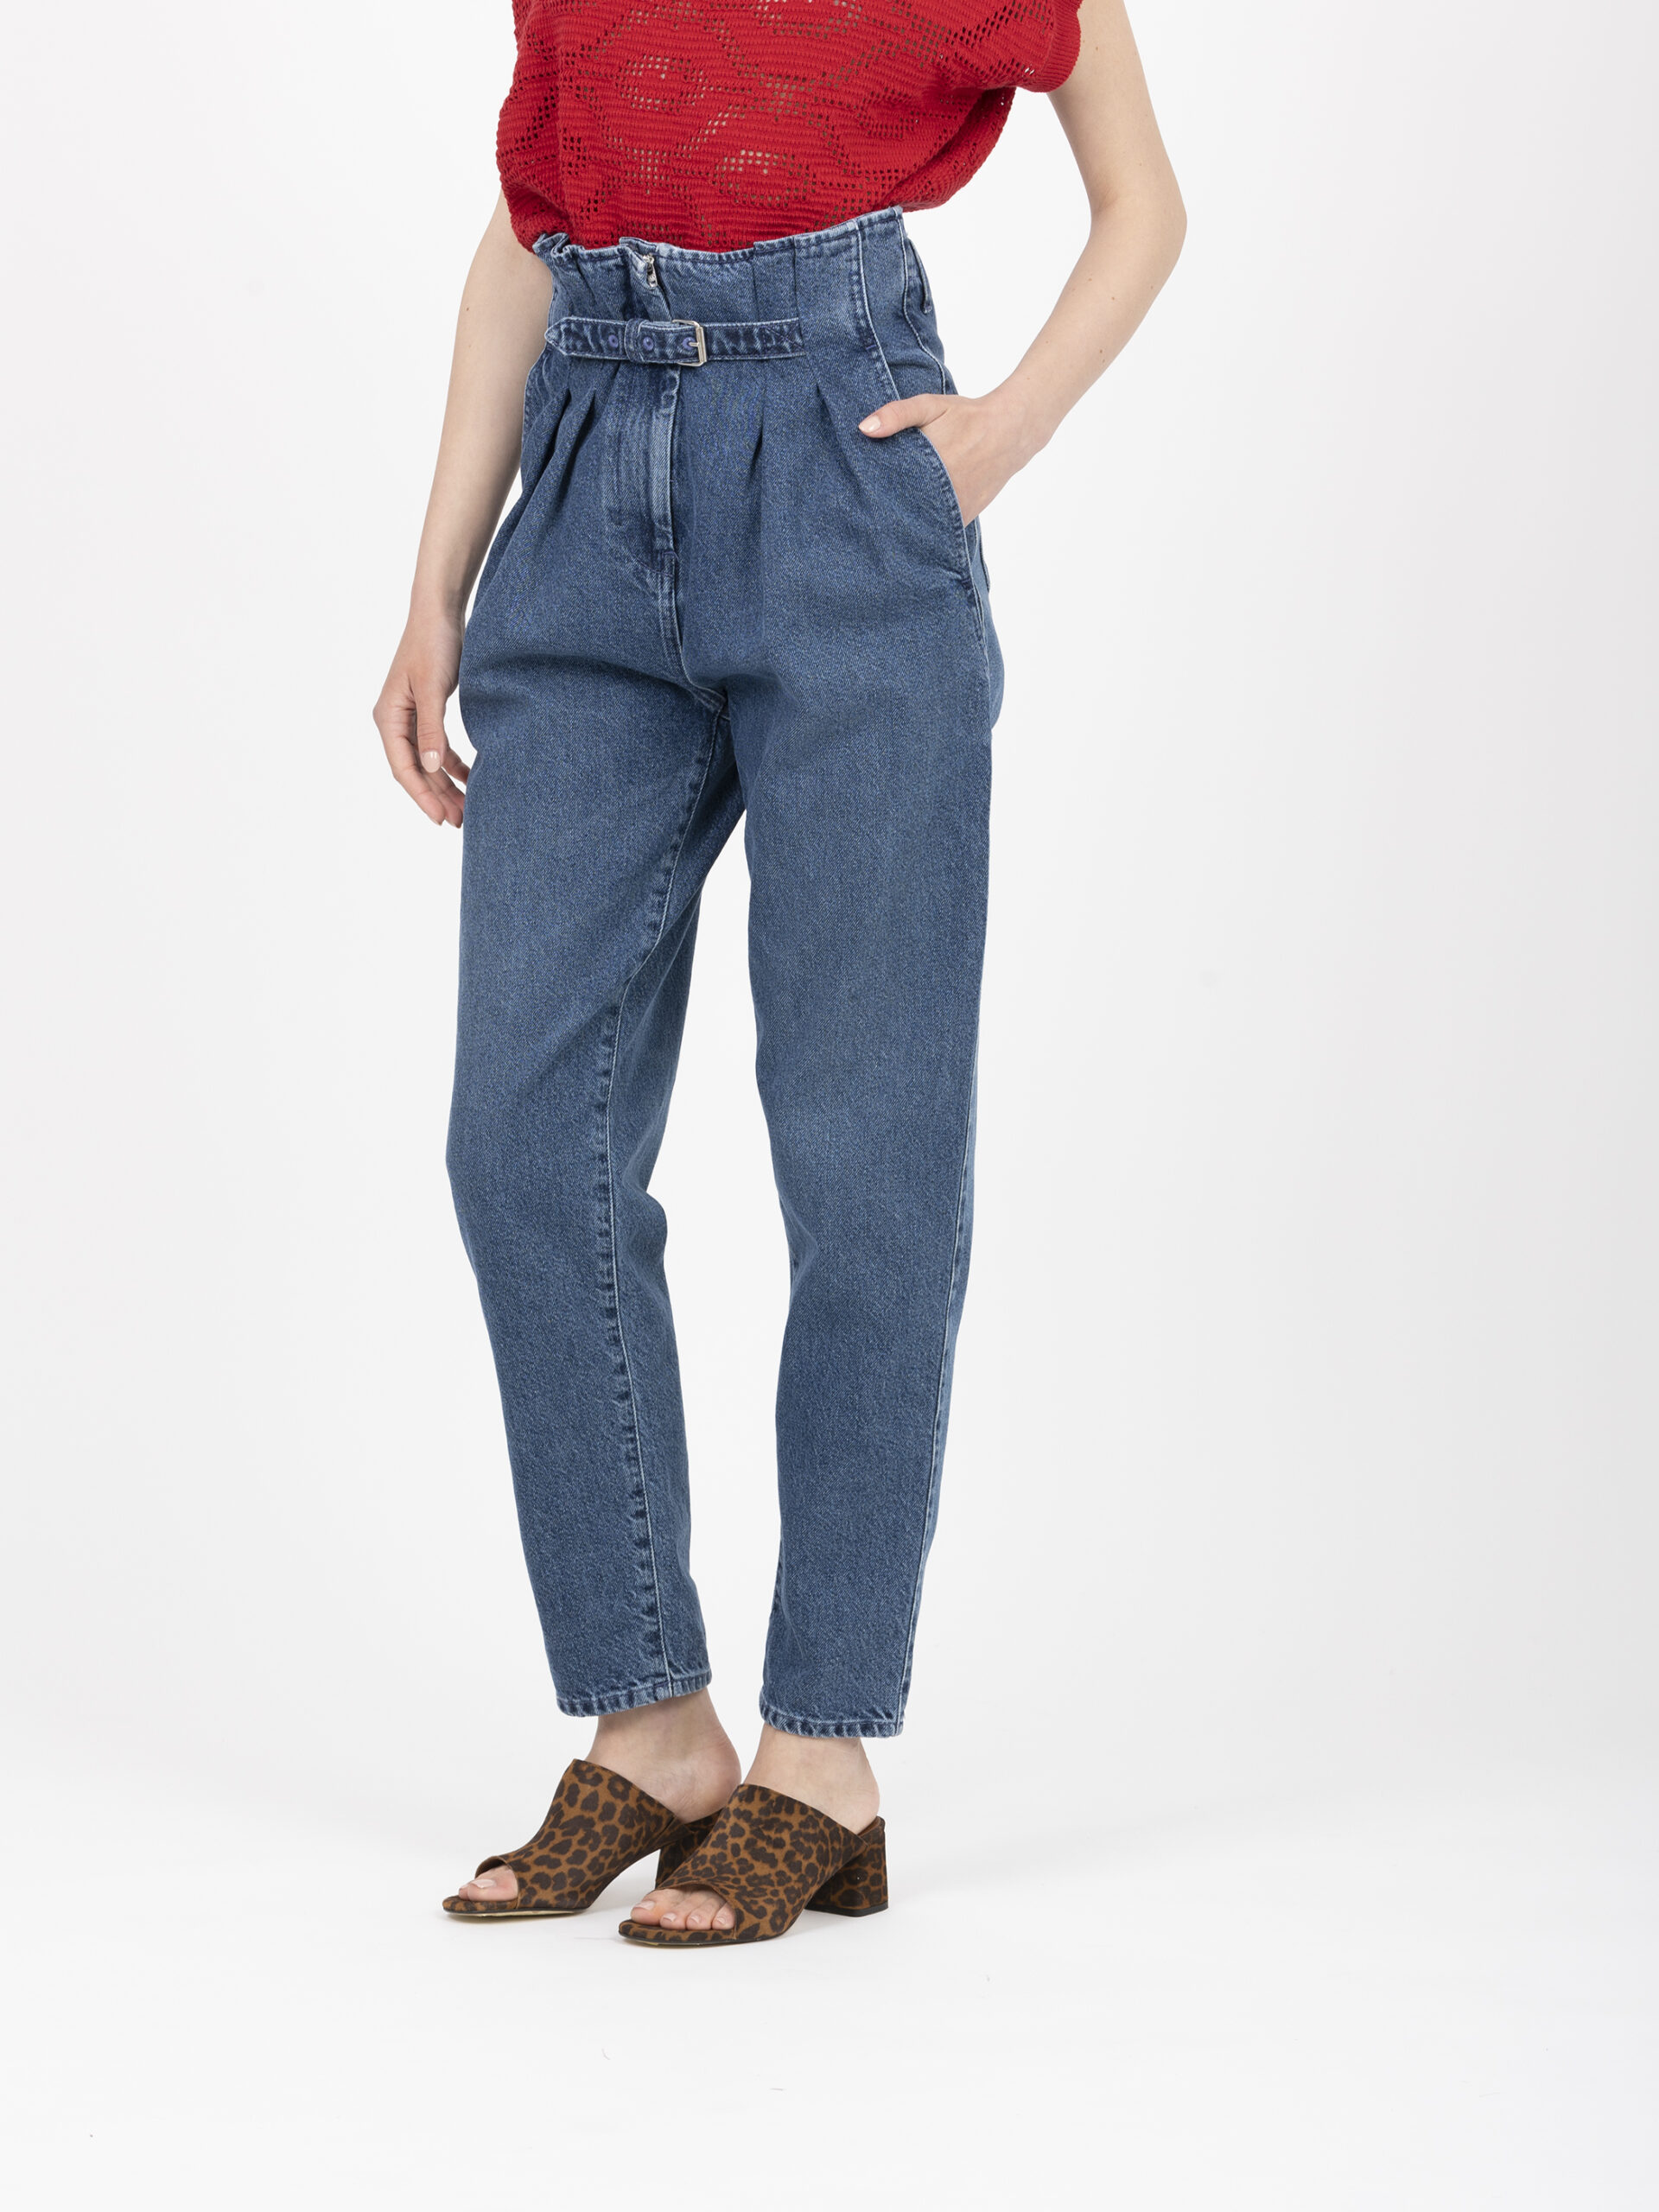 acady-belted-pleated-waist-denim-jeans-carrot-fit-iro-matchboxathens